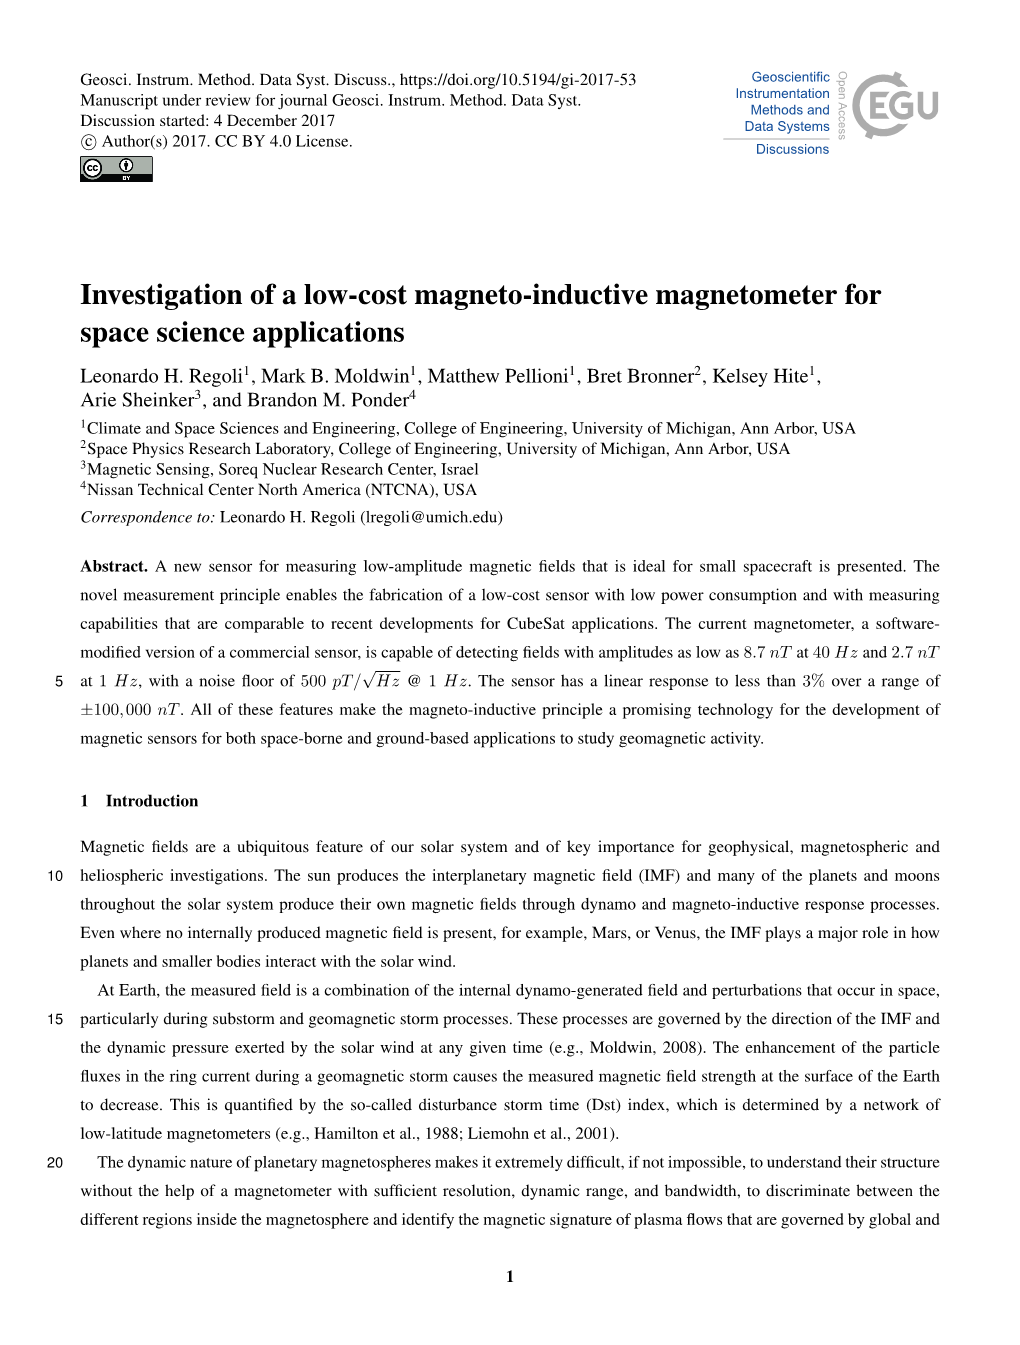 Investigation of a Low-Cost Magneto-Inductive Magnetometer for Space Science Applications Leonardo H